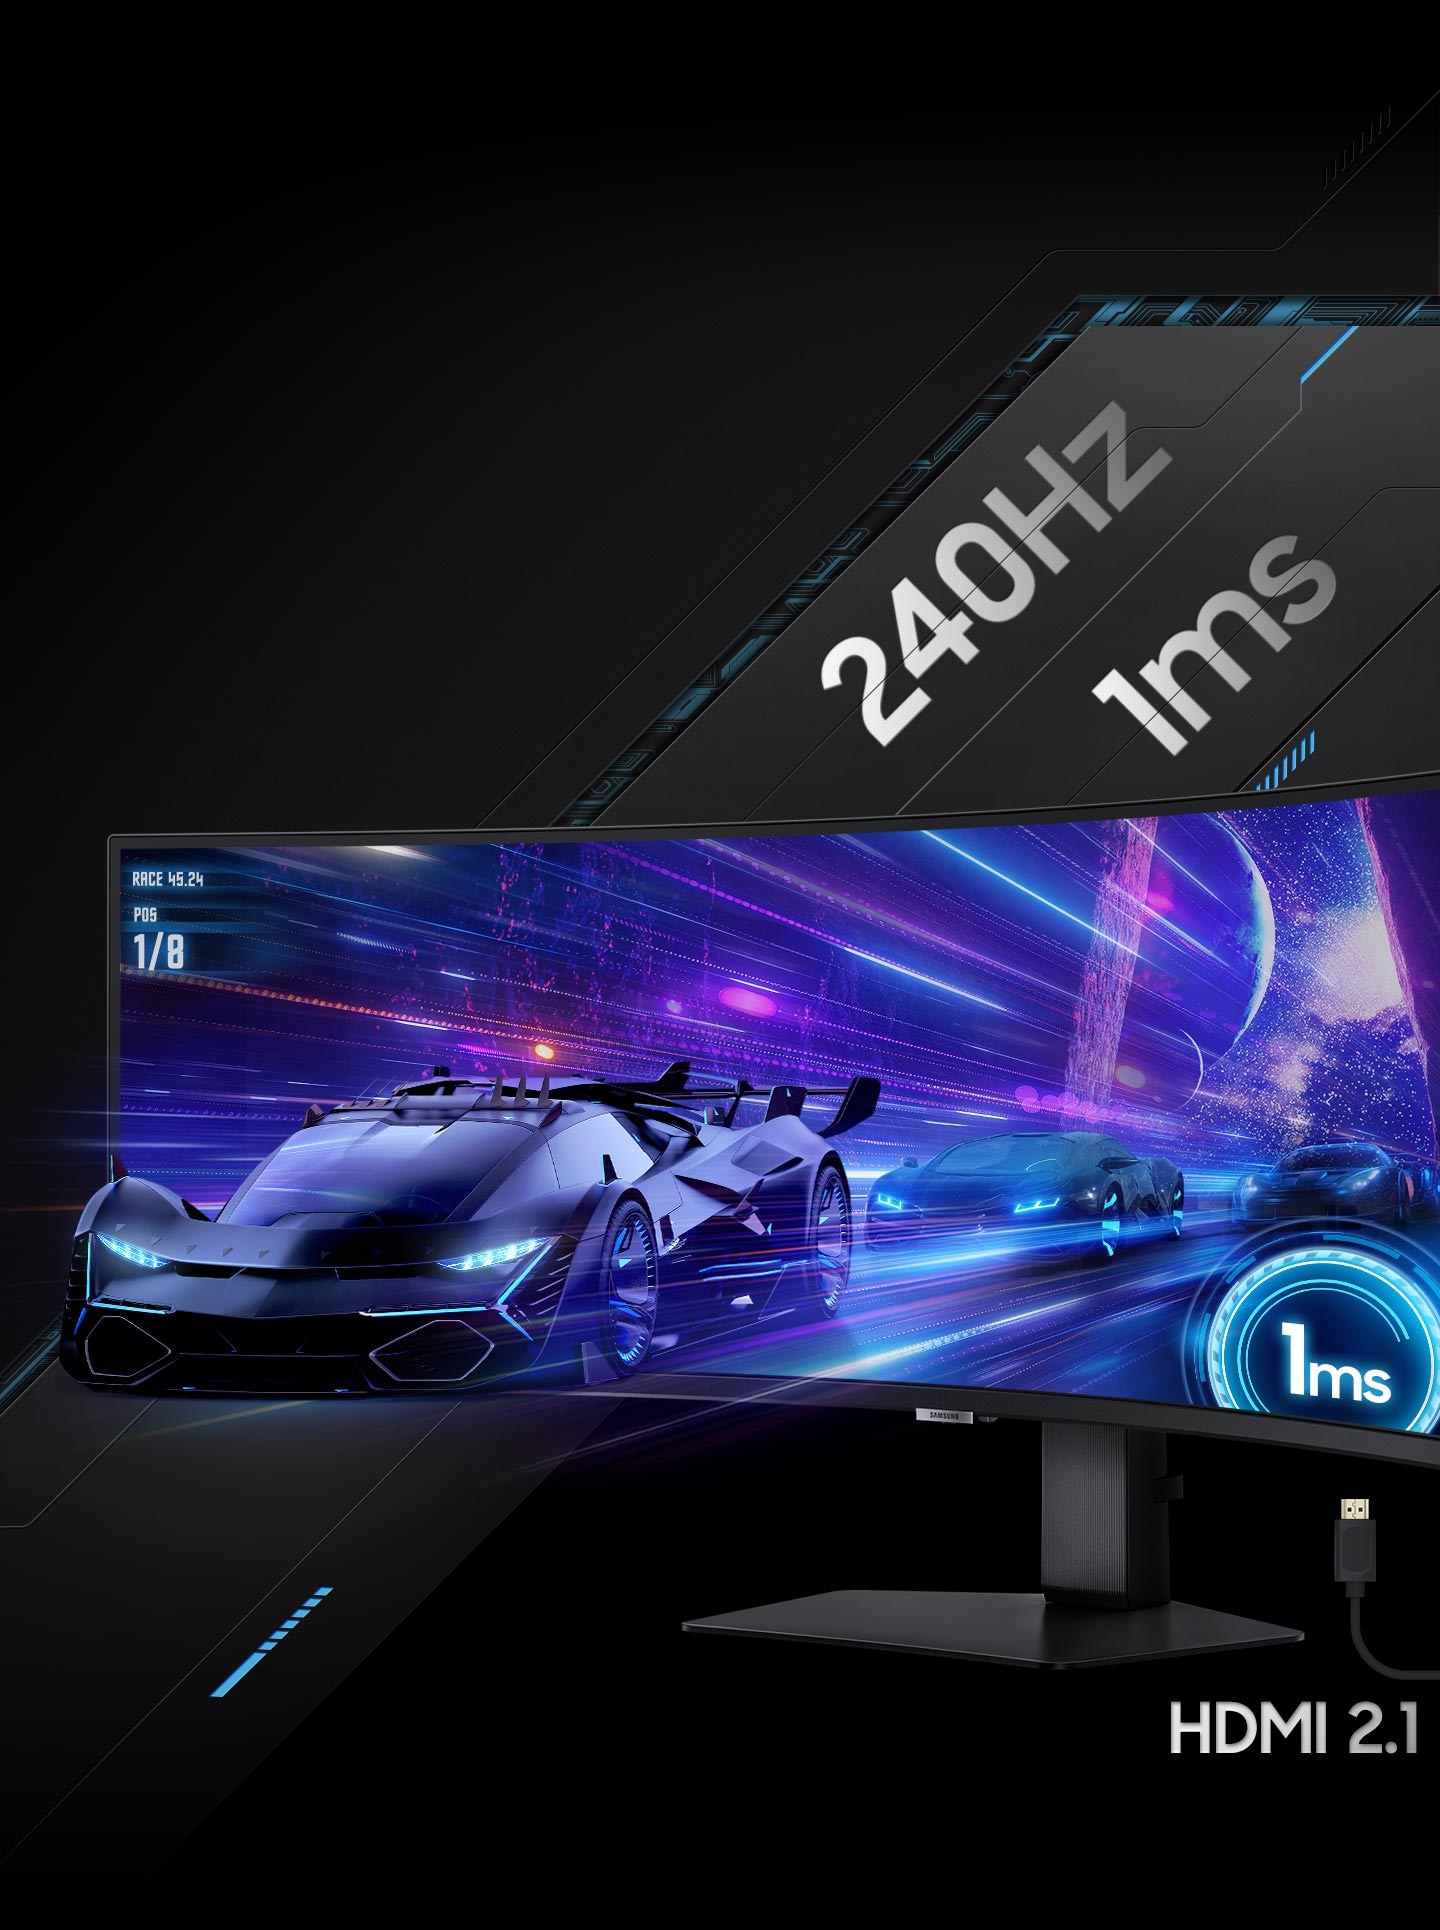 https://images.samsung.com/is/image/samsung/p6pim/za/feature/164874639/za-feature-rapid-240hz-refresh-rate-and-lightning-fast-1ms-response-time-538794883?$FB_TYPE_K_JPG$